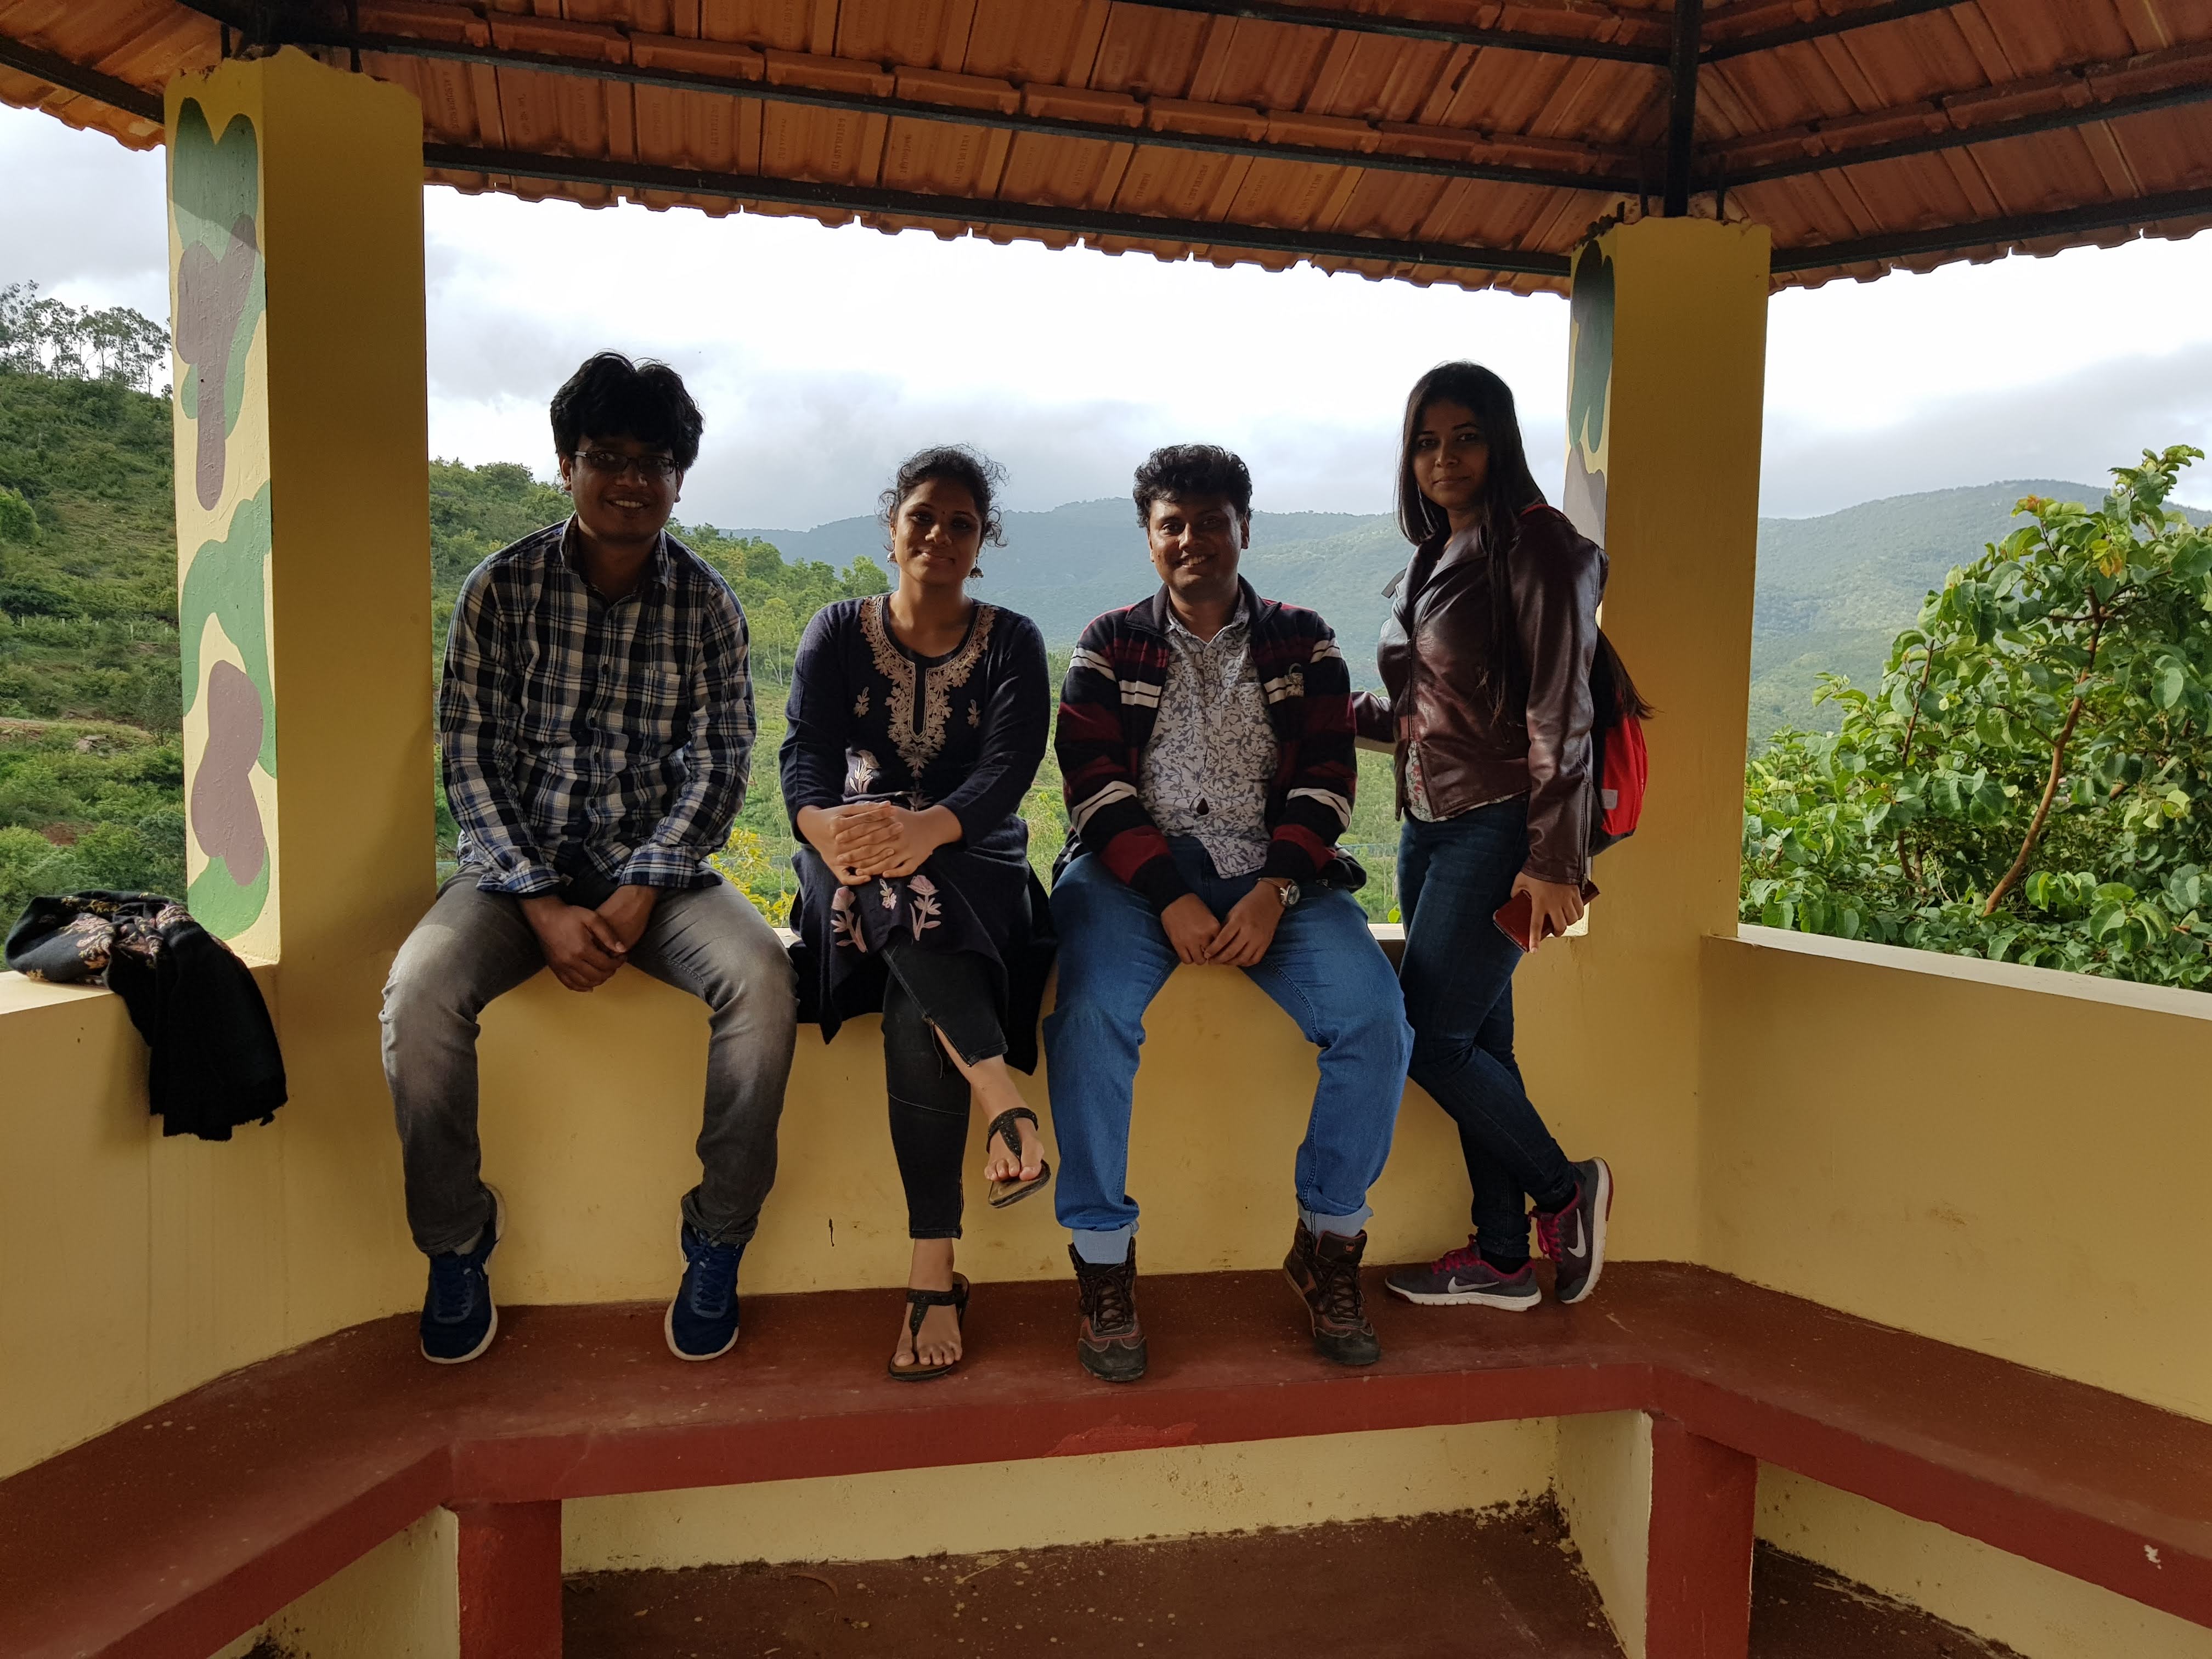 Sourav Ghosh with friends from IIT Kharagpur, during a trip to Chikmagalur